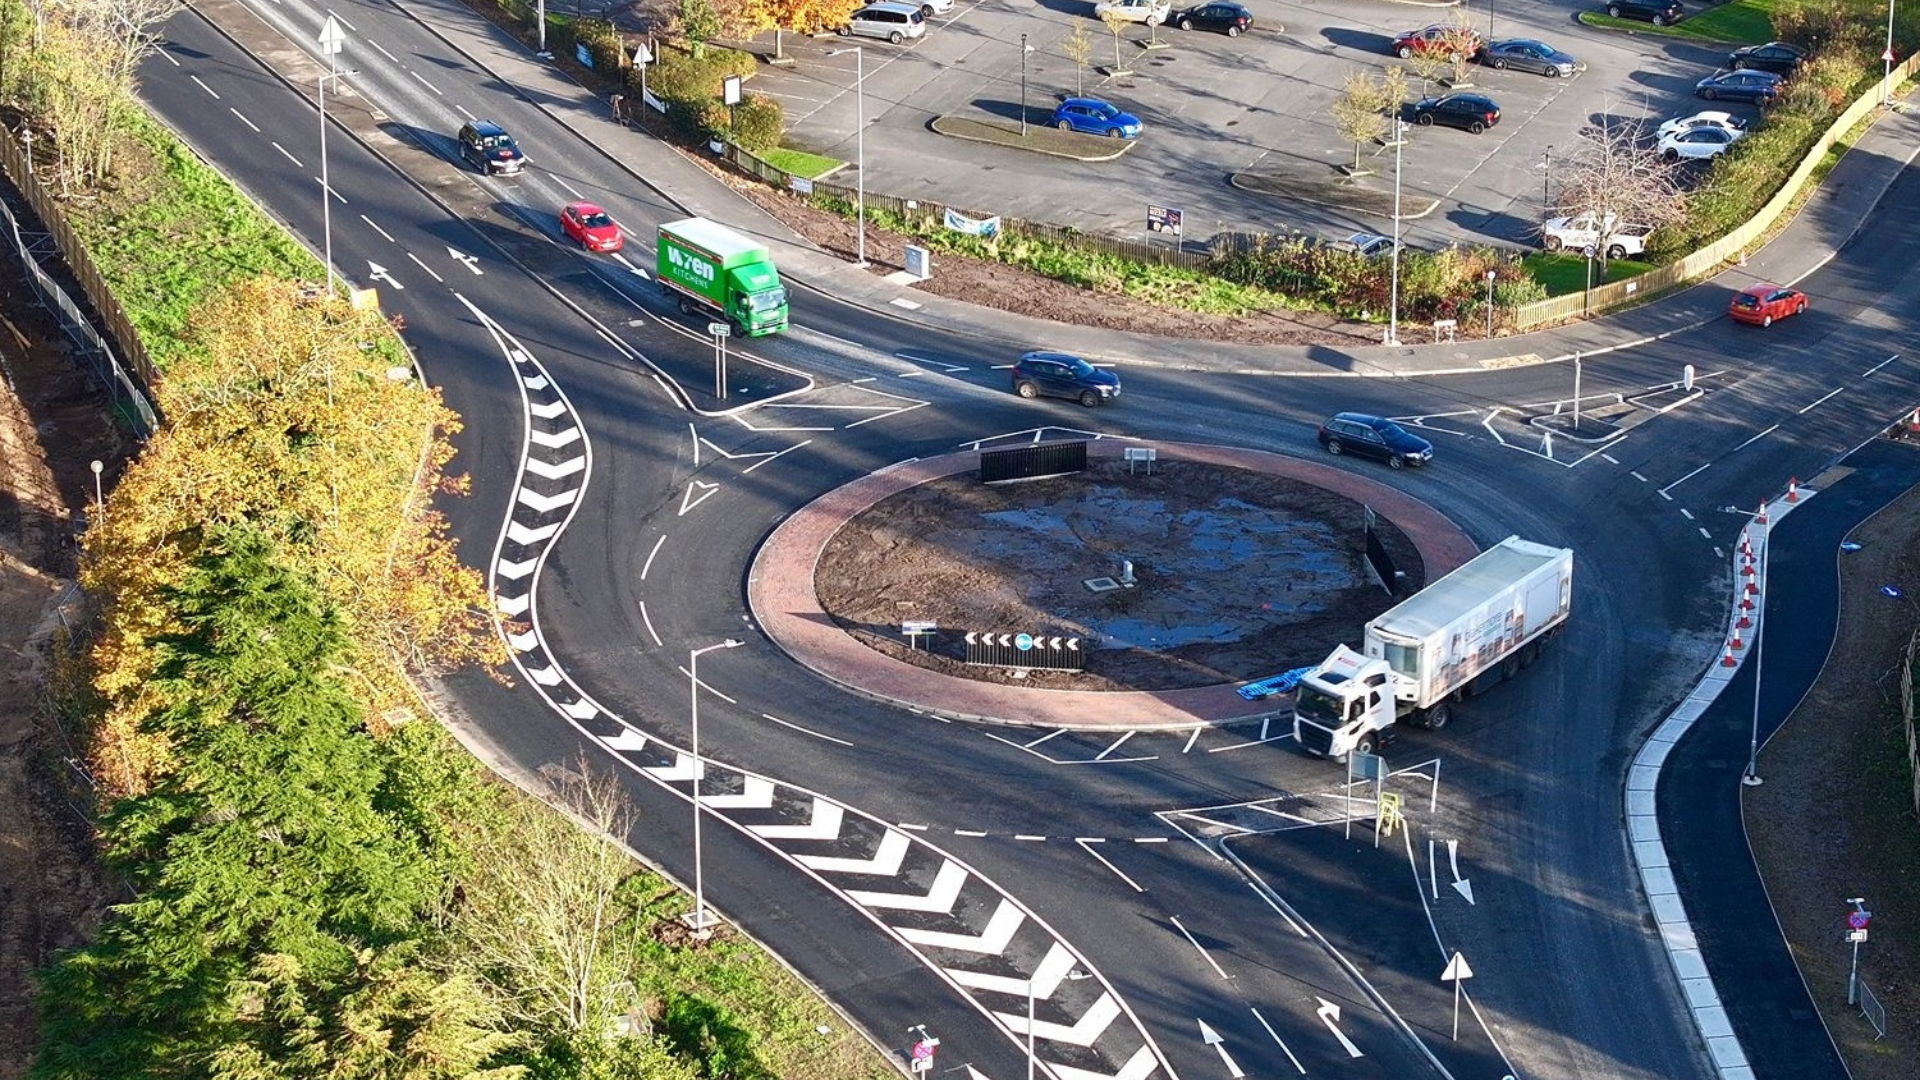 A view of the completed Marsh Lane roundabout